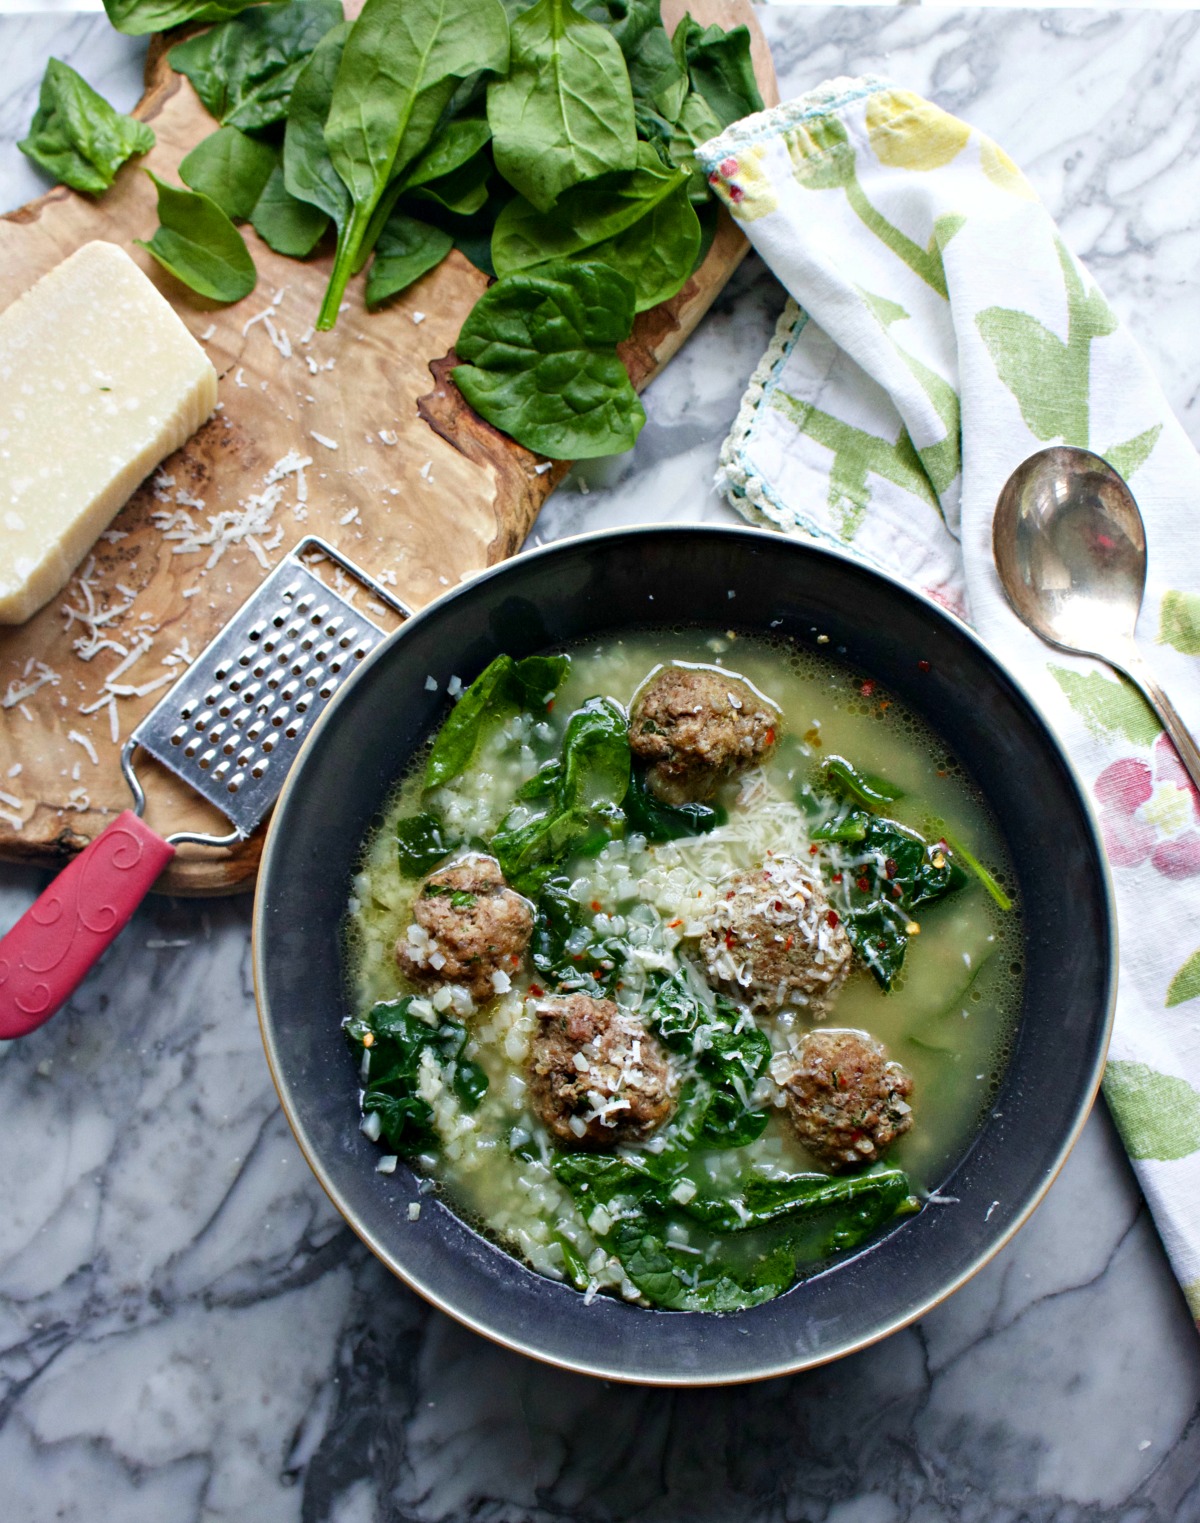 Italian Wedding Soup Recipe with Prosciutto Meatballs from Spinach Tiger